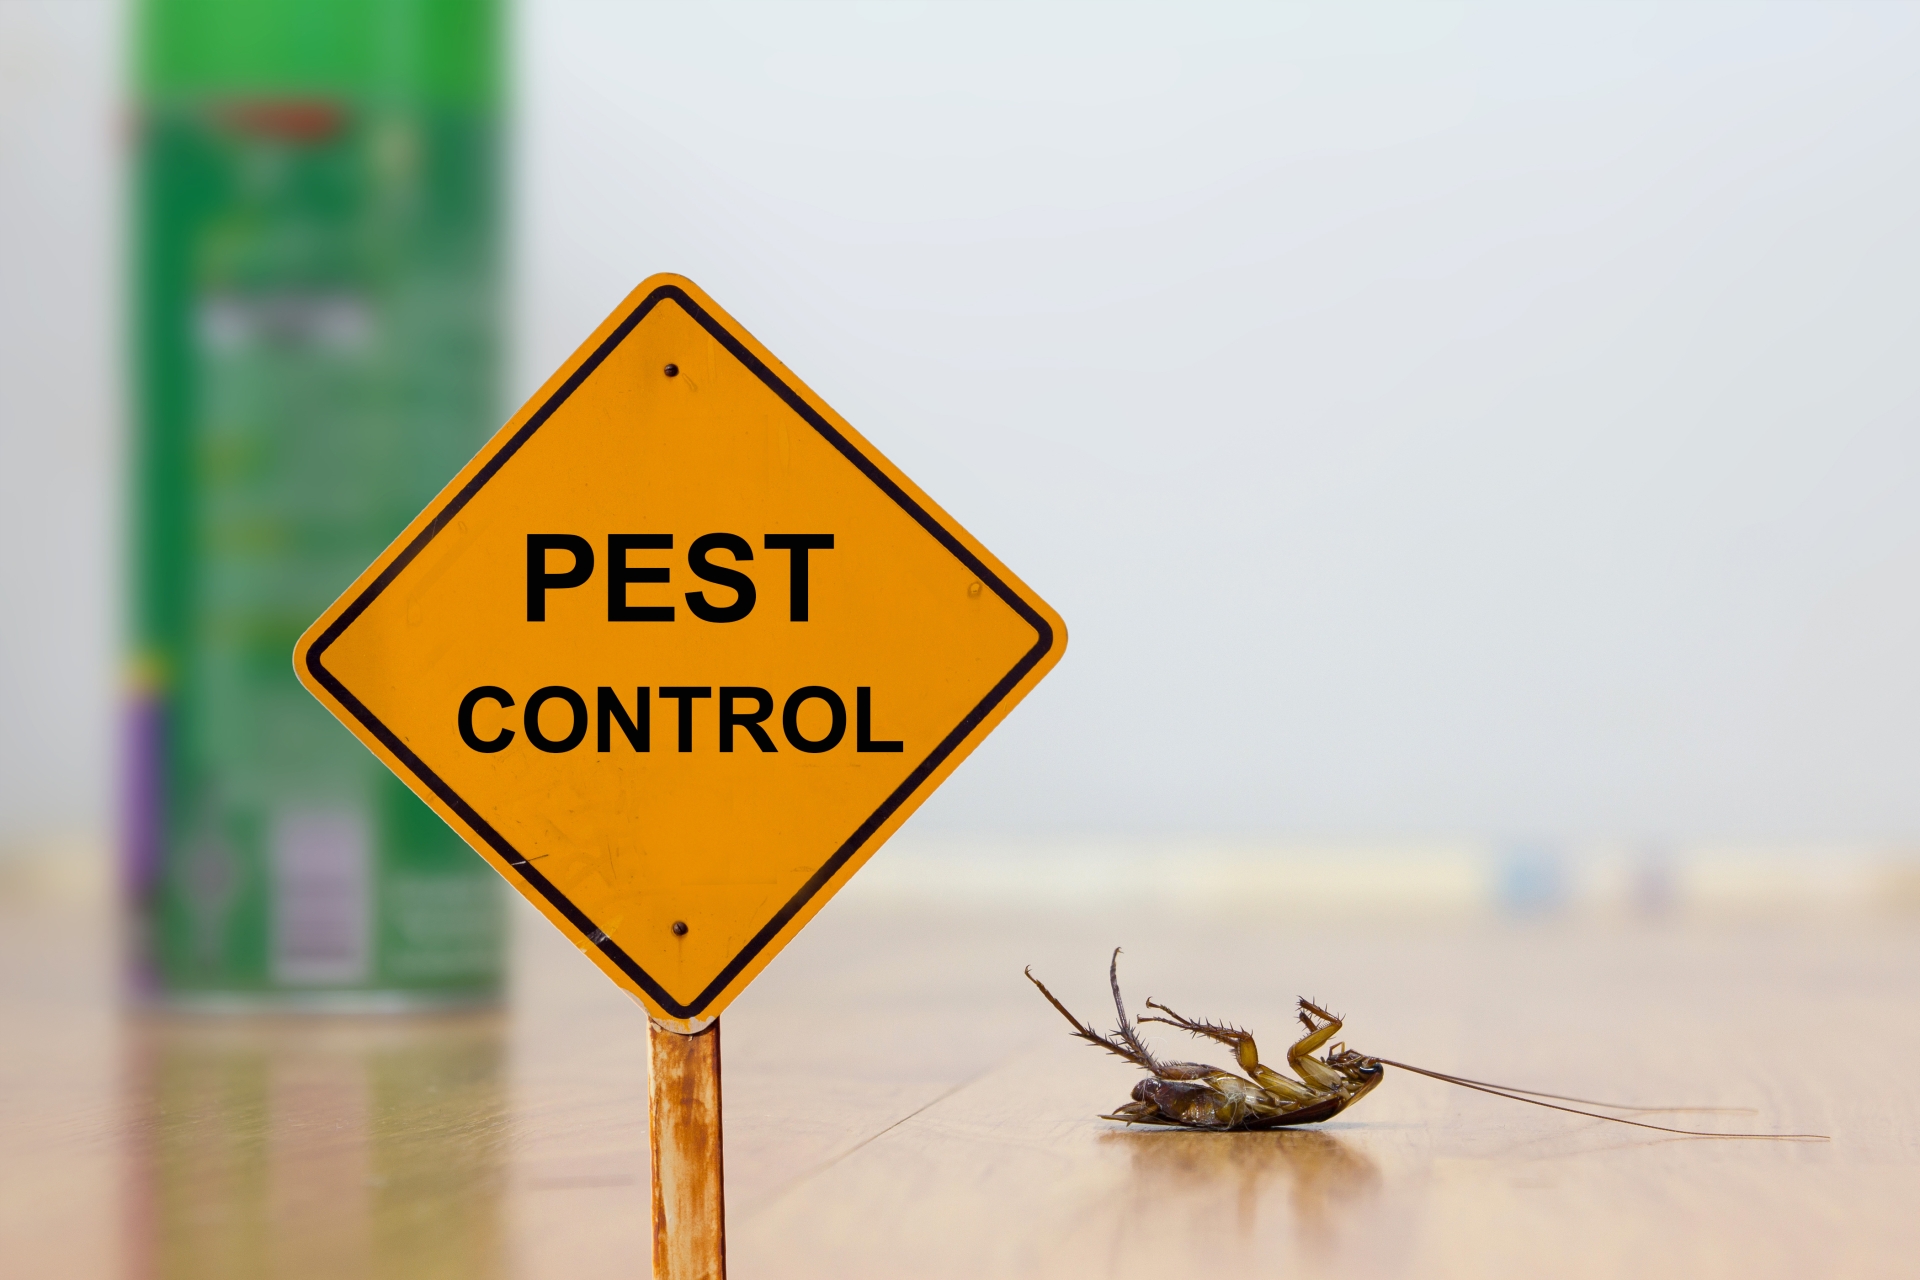 24 Hour Pest Control, Pest Control in Crystal Palace, Upper Norwood, SE19. Call Now 020 8166 9746